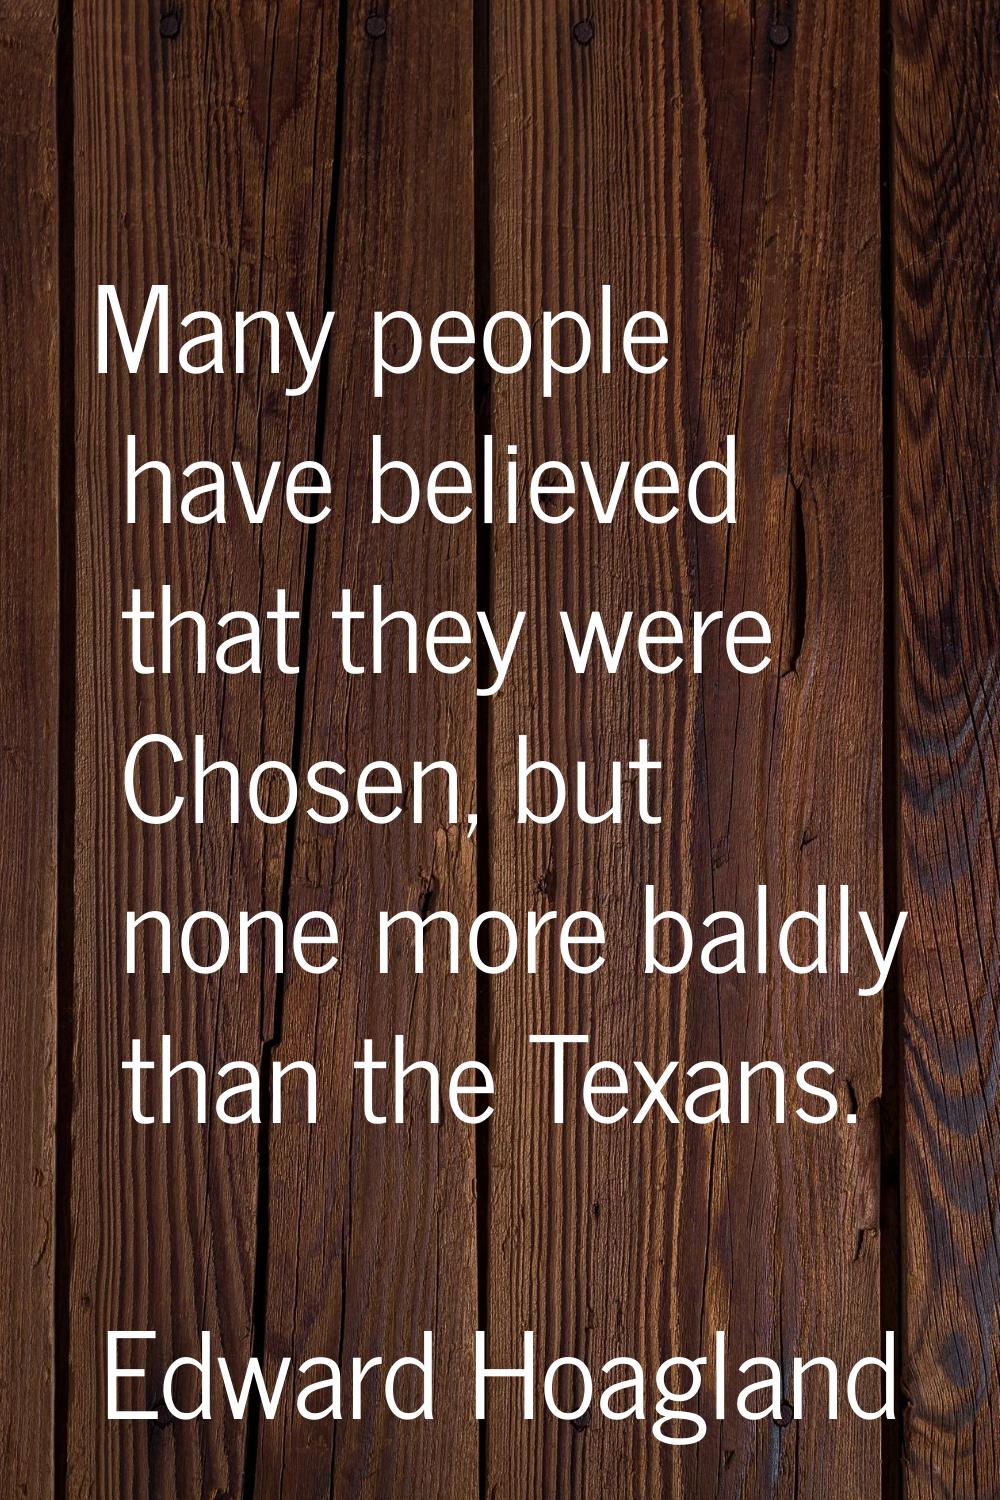 Many people have believed that they were Chosen, but none more baldly than the Texans.